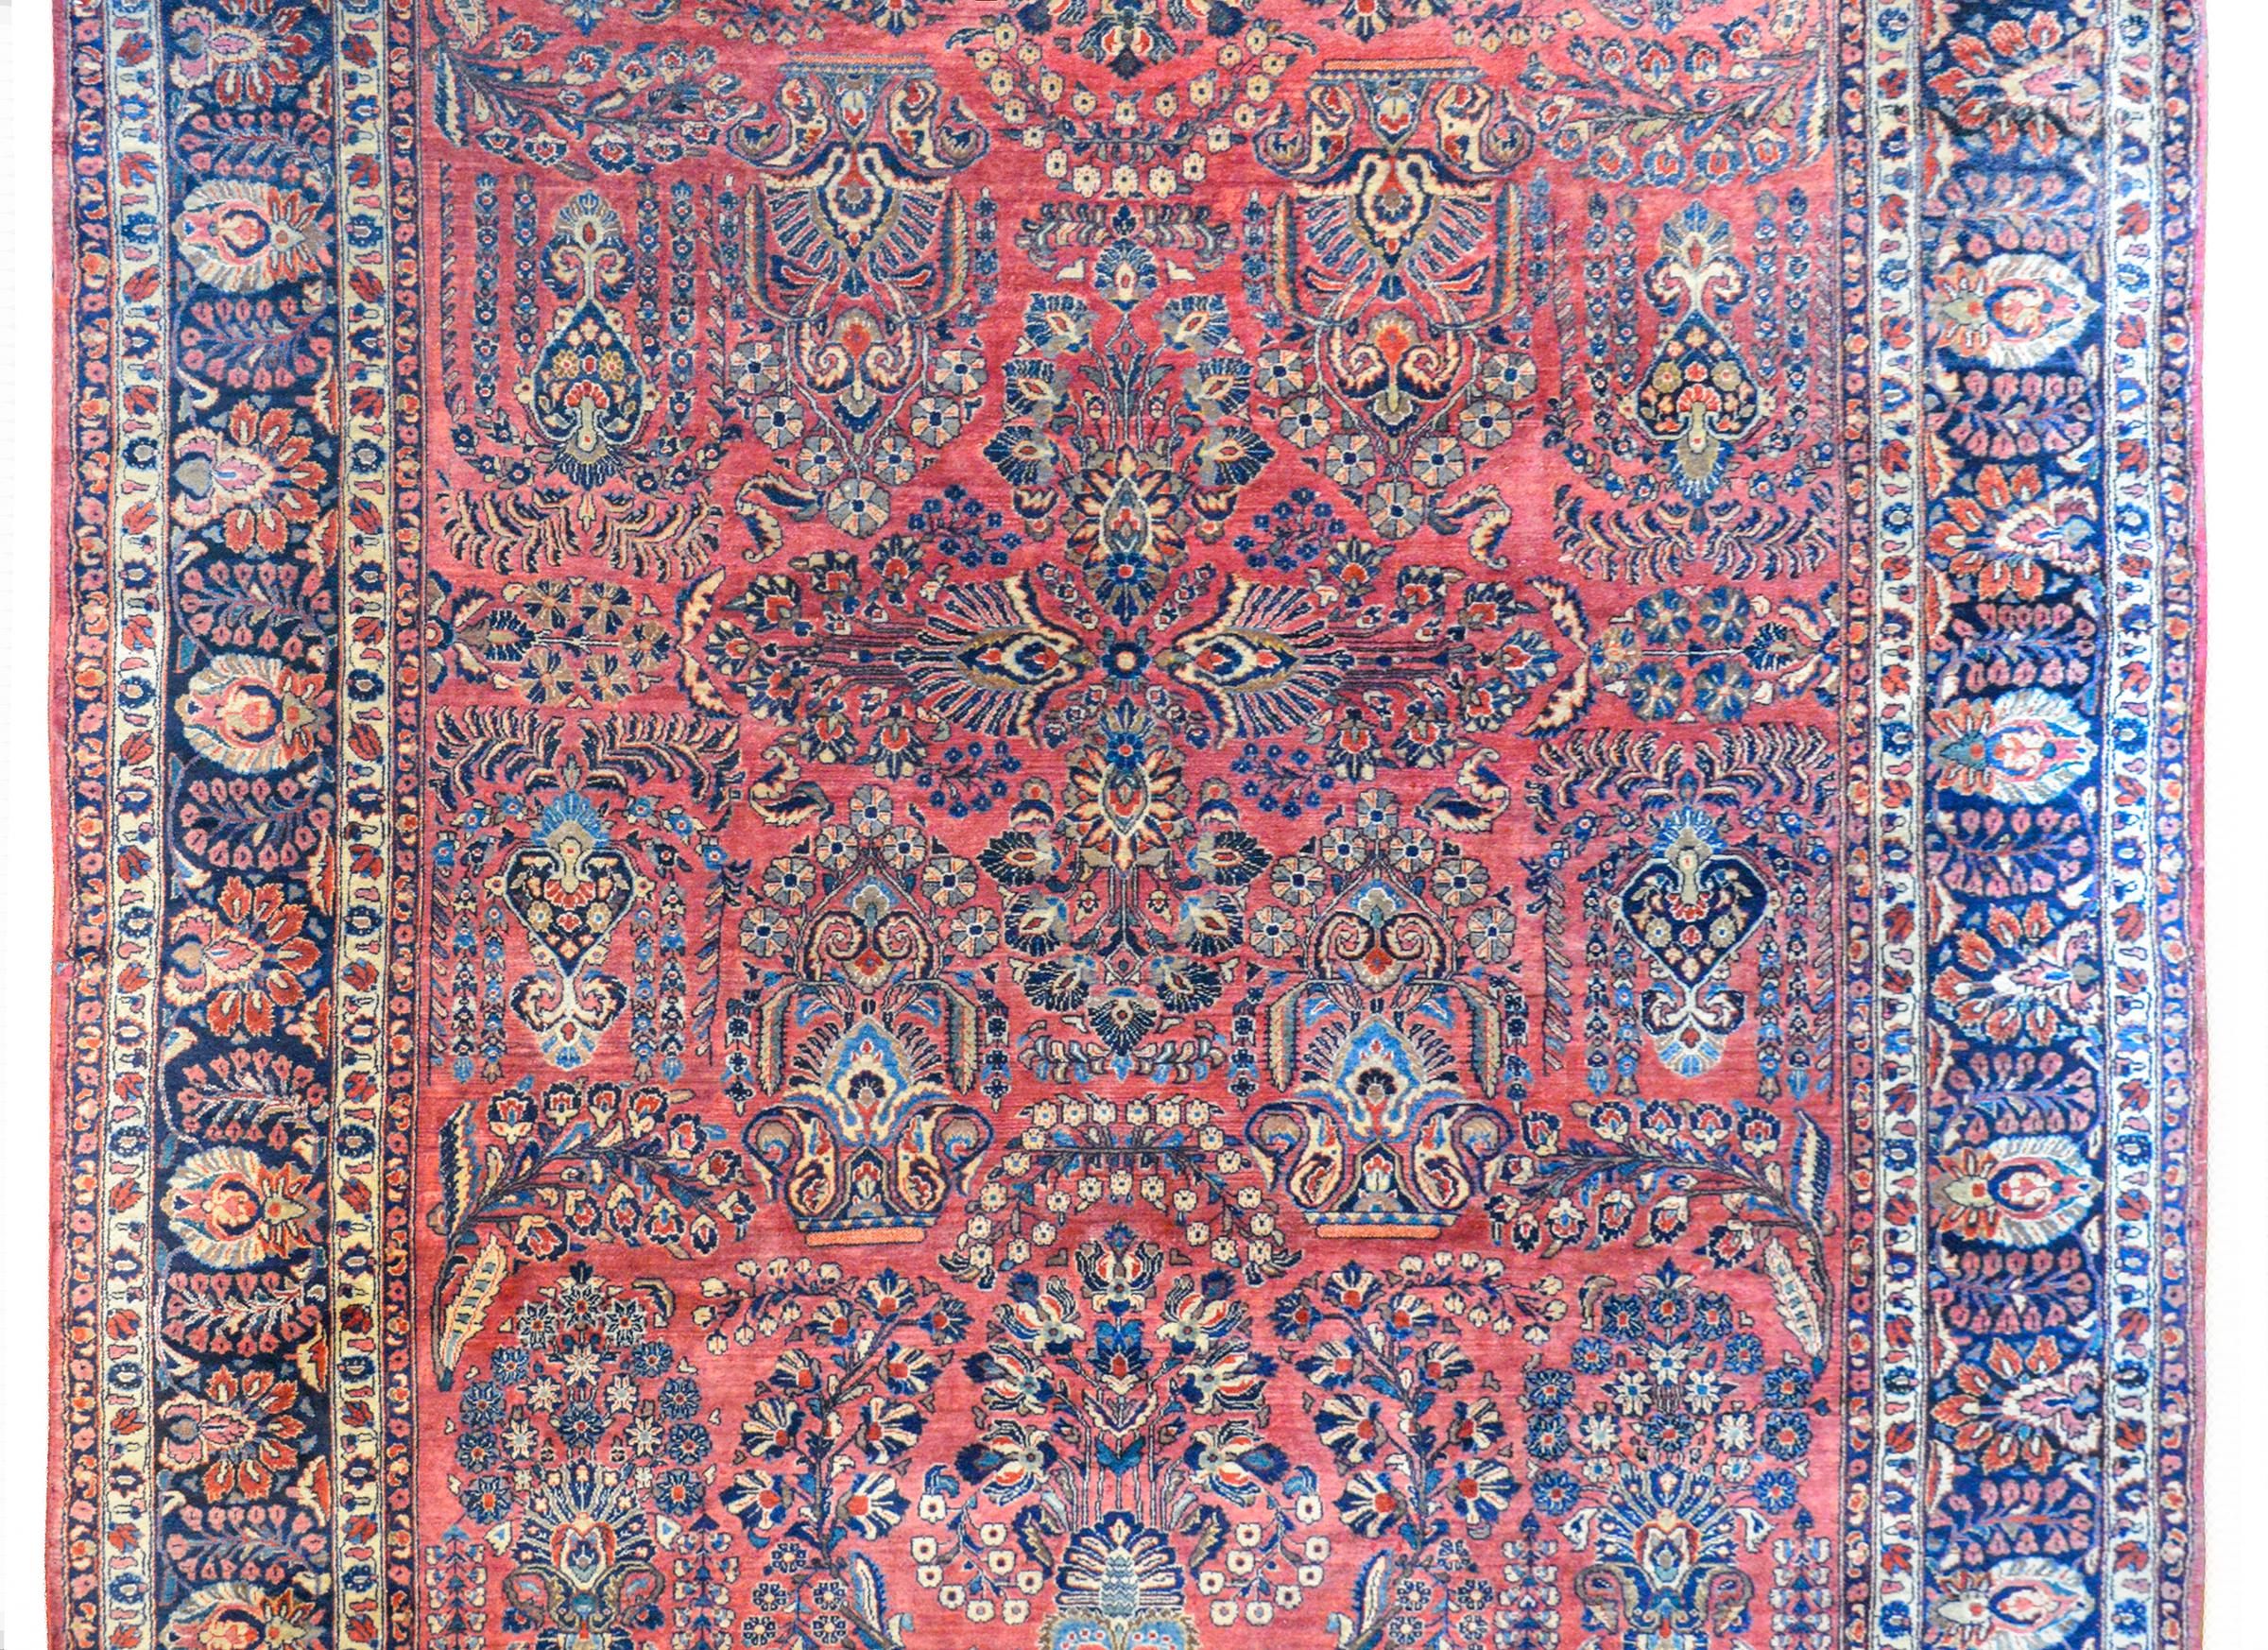 A fantastic early 20th century Persian Sarouk with the most beautiful large-scale mirrored floral and leaf pattern woven in traditional Sarouk colors of light and dark indigo, cream, and pink against a rich cranberry ground. The border is amazing